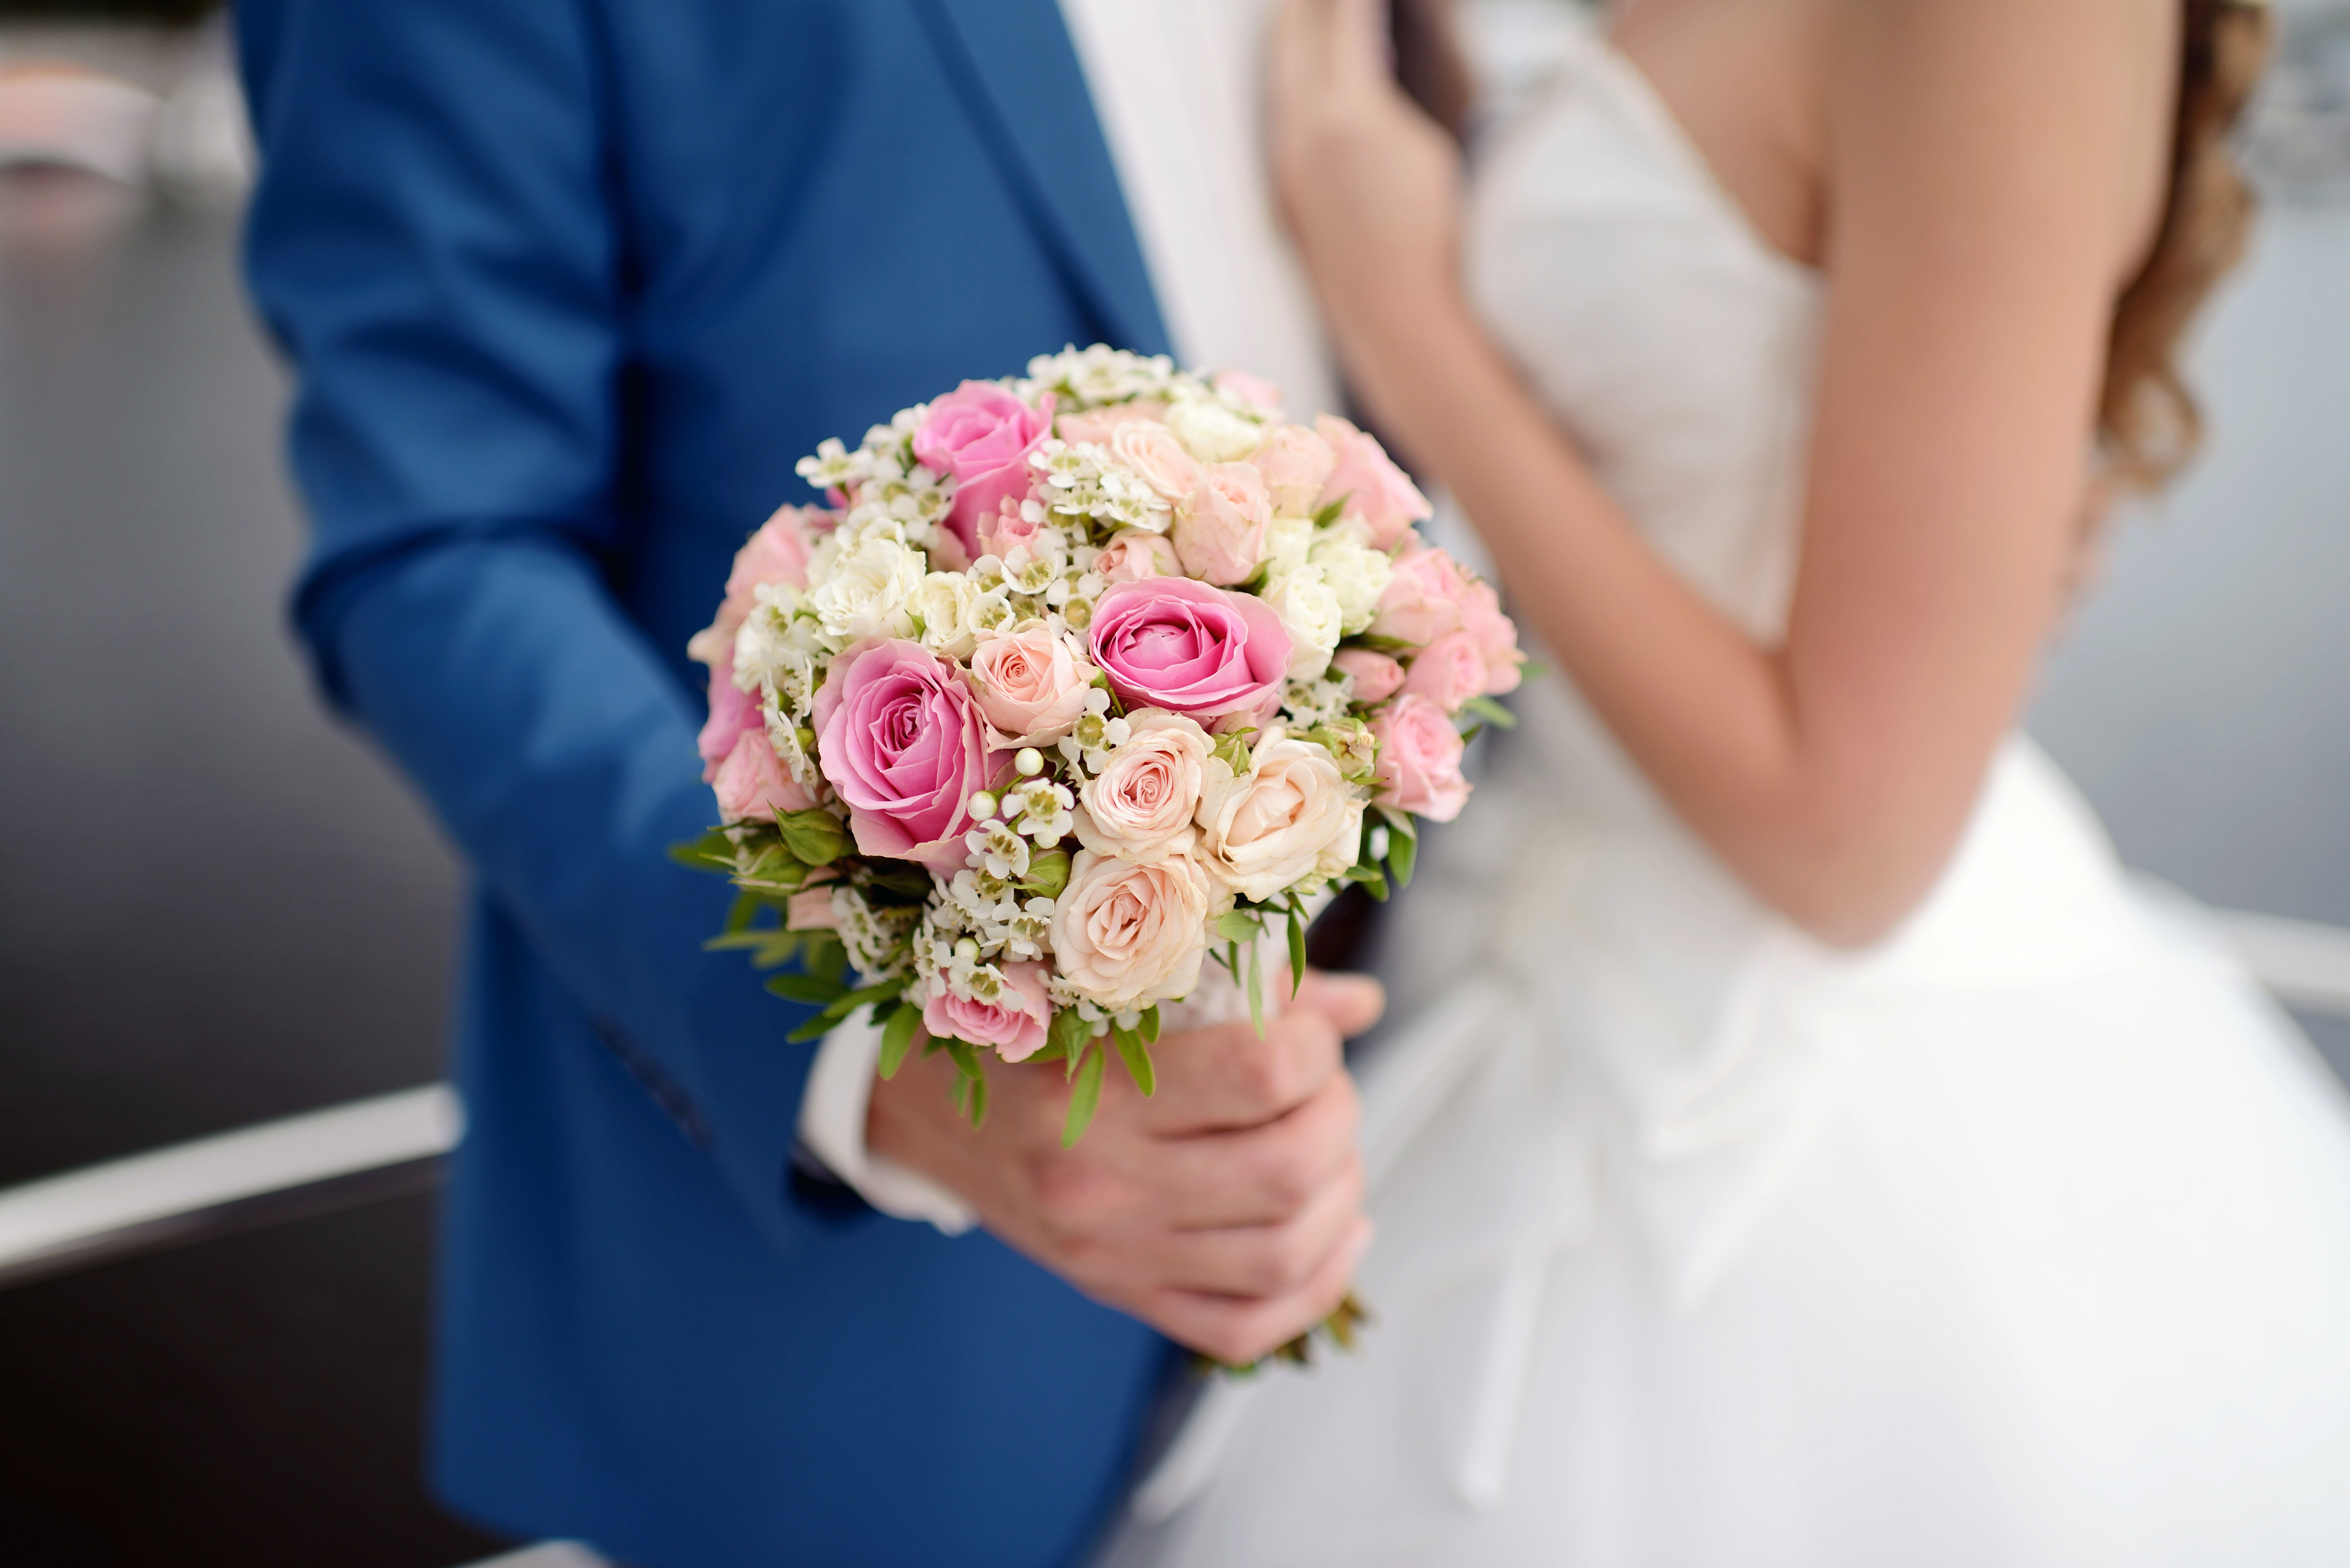 Top Transport Tips to Help You Plan Your Brisbane Wedding